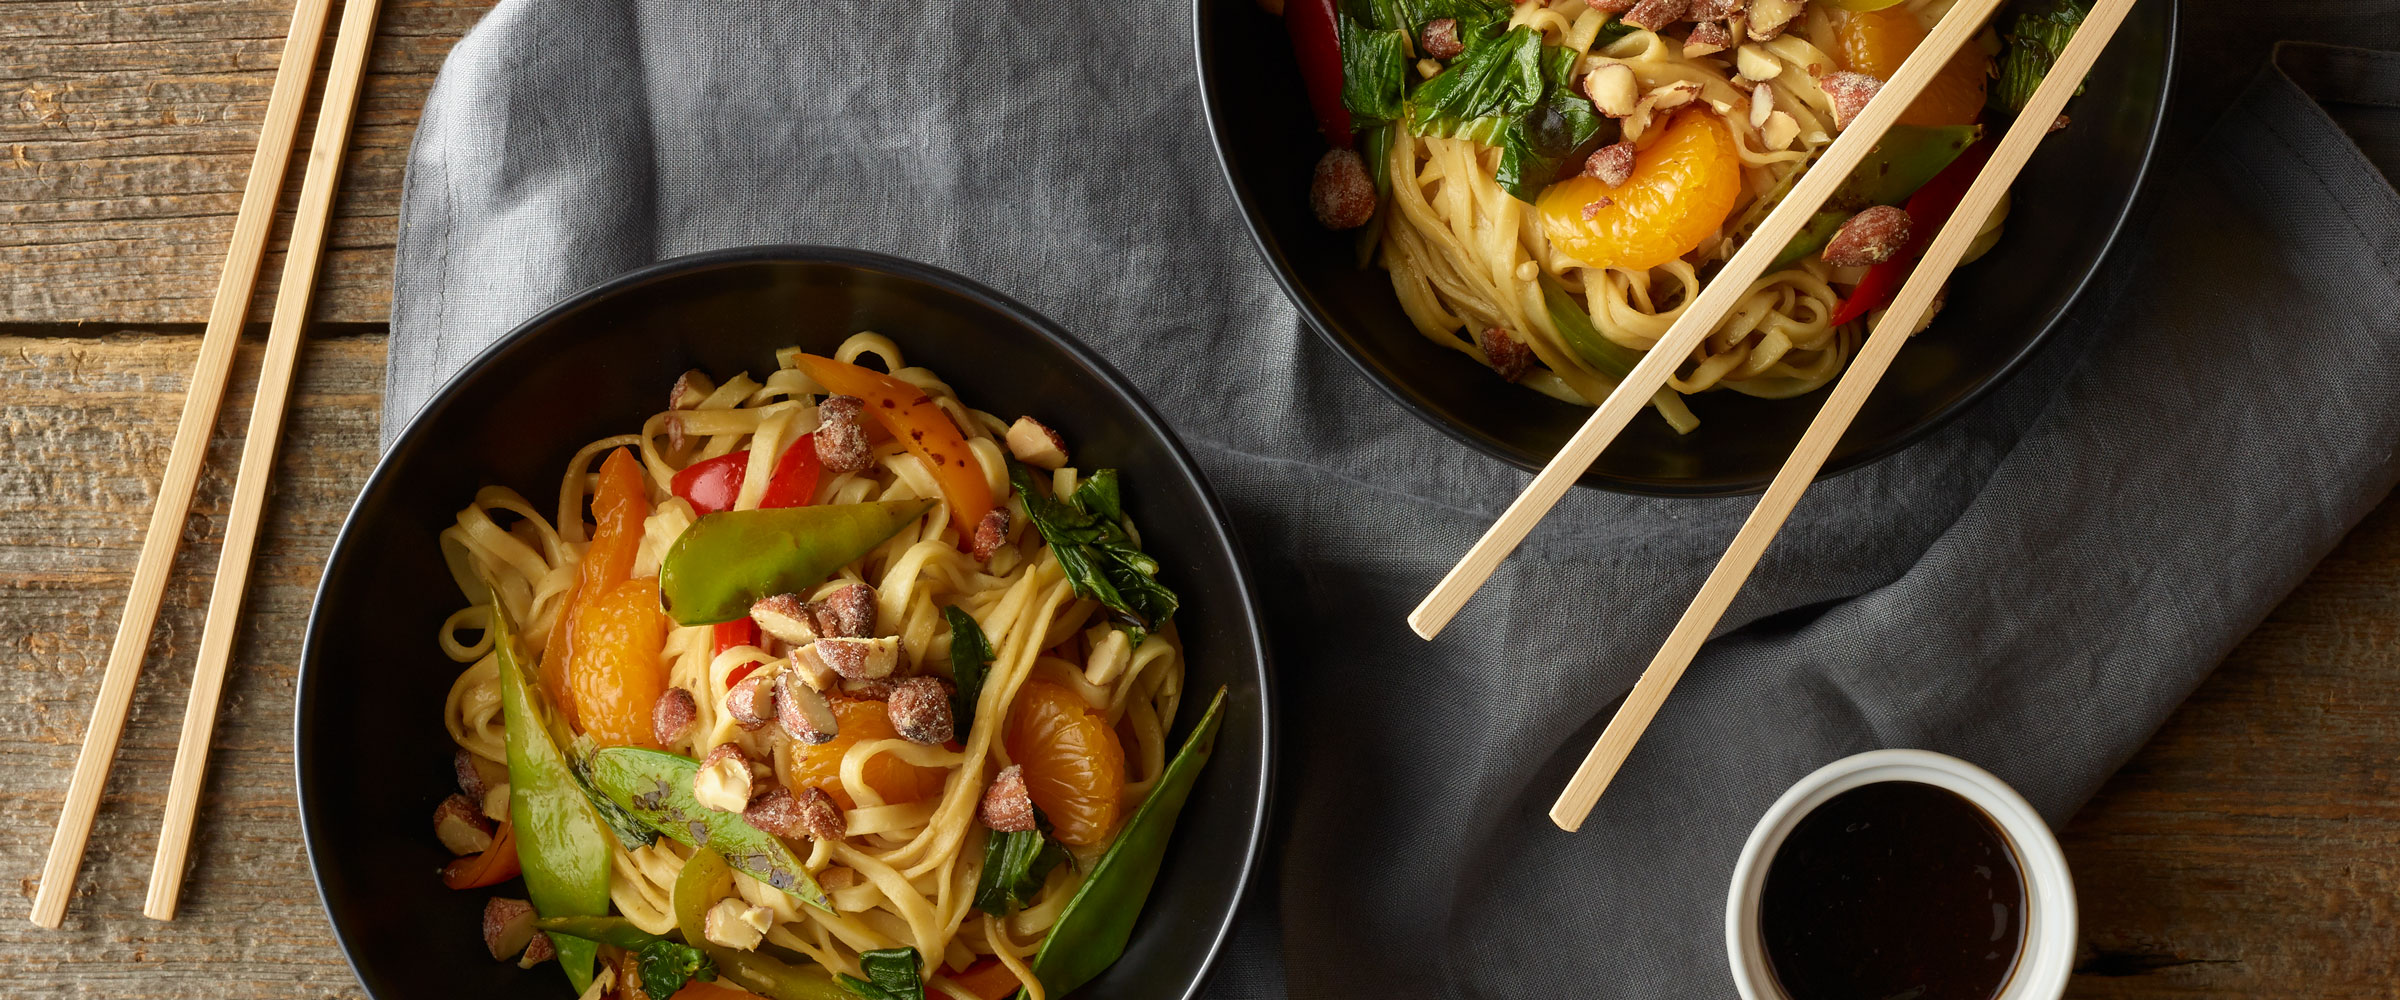 Citrus Chicken Lo Mein over noodles in black bowls with chopsticks